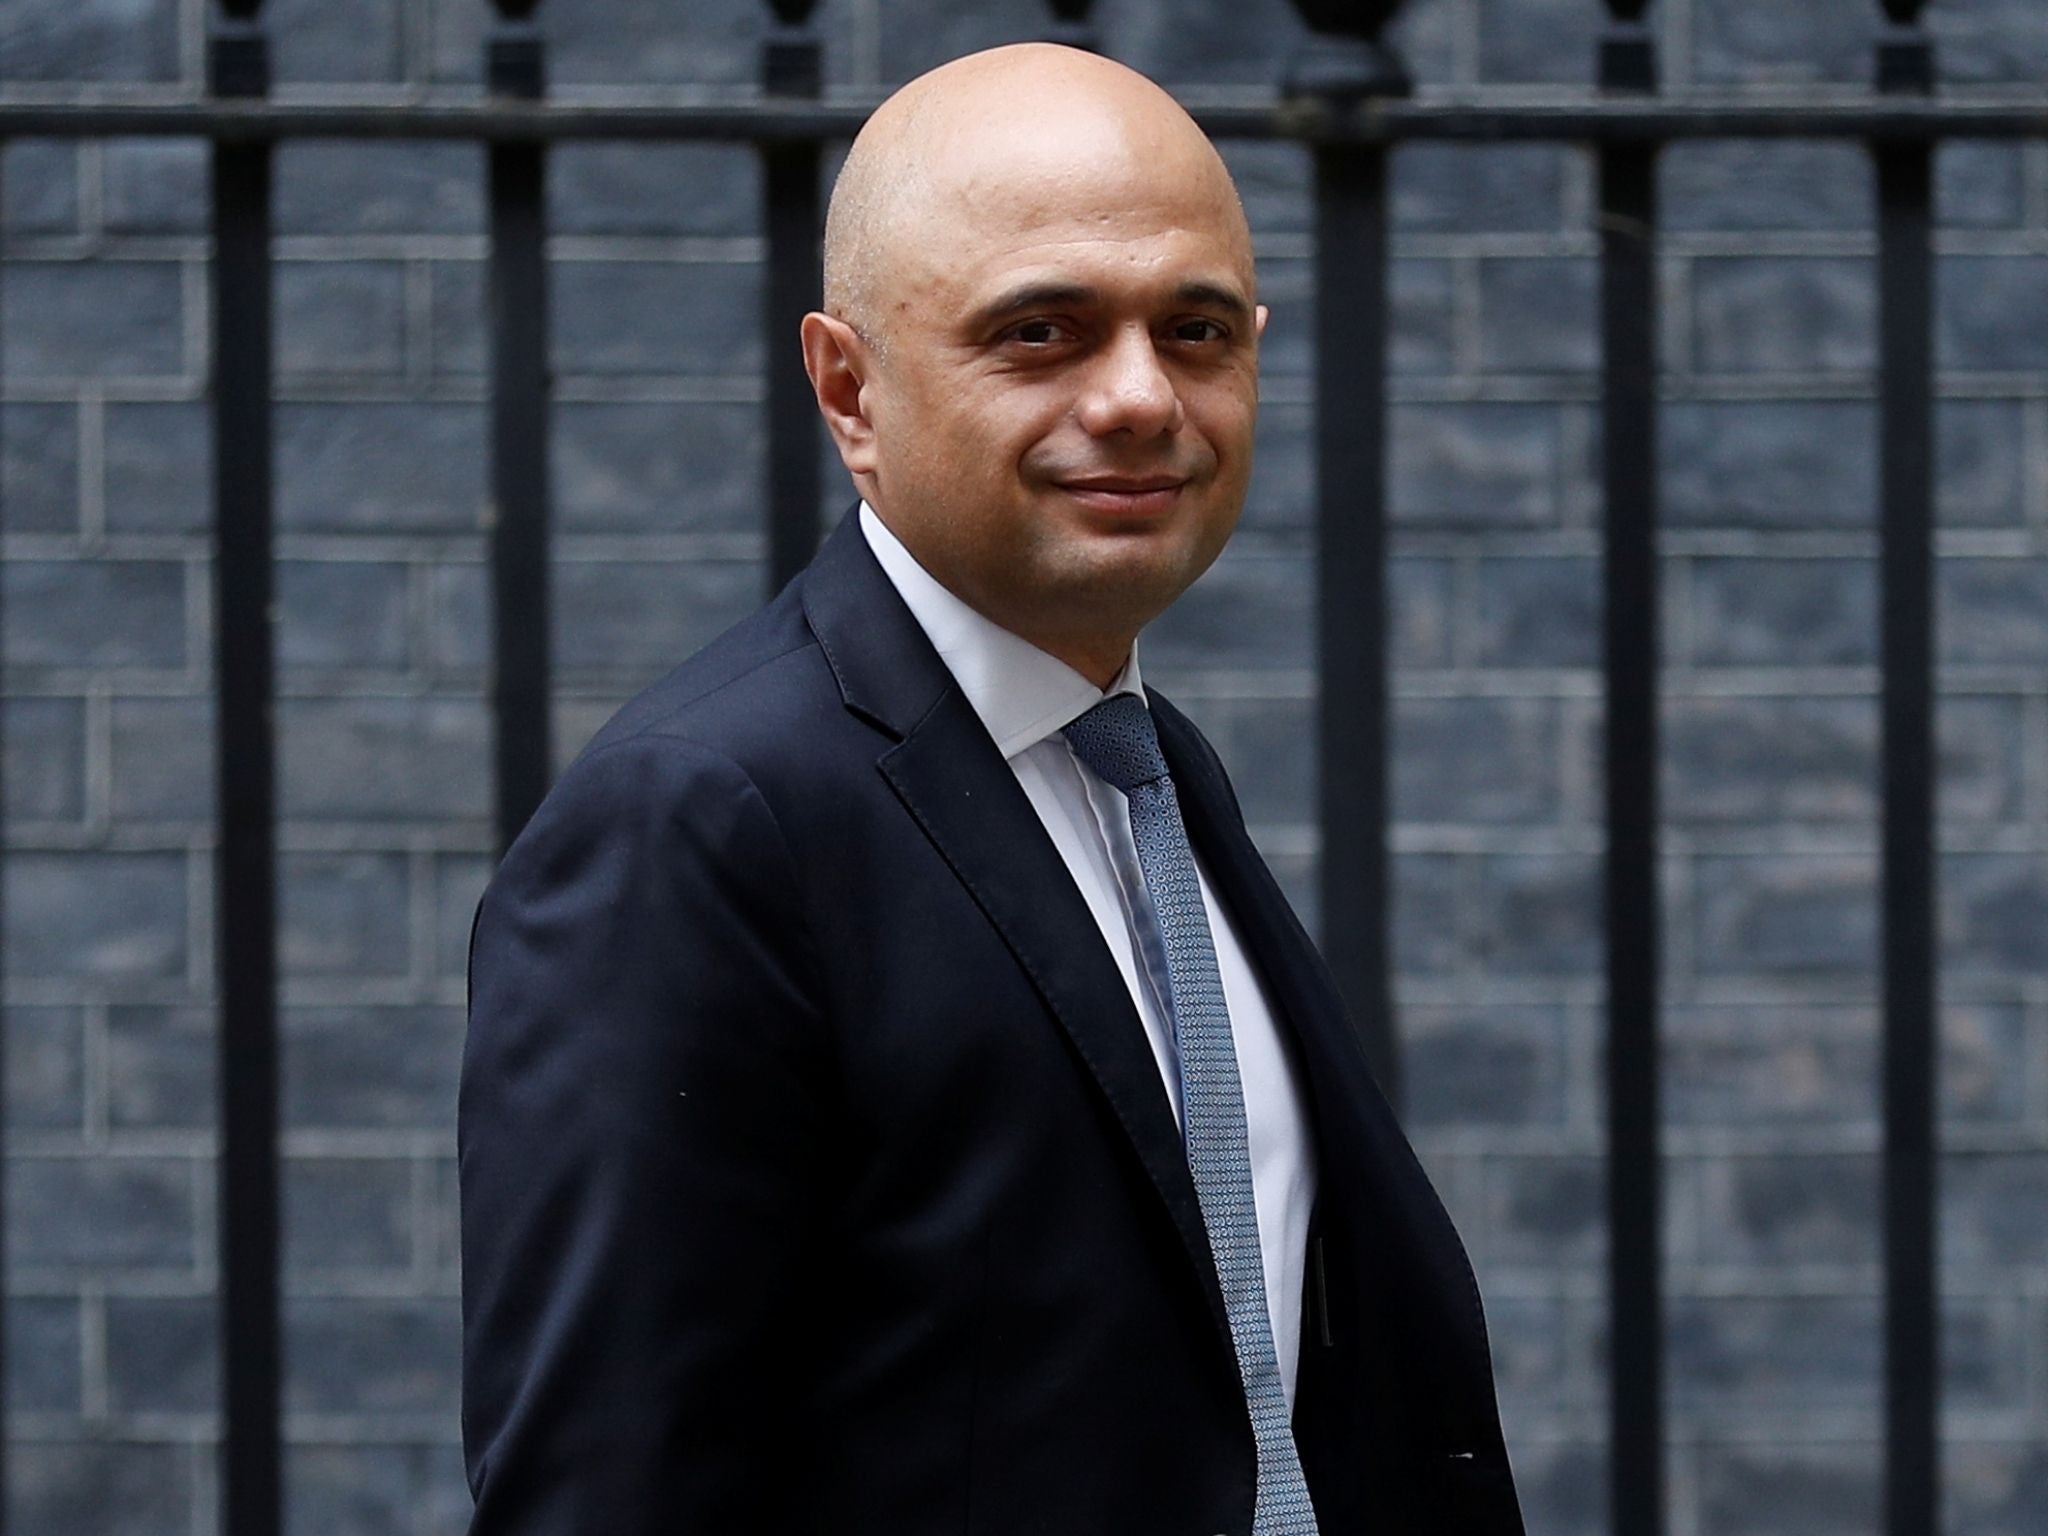 Sajid Javid has apologised over the wording of one of his tweets